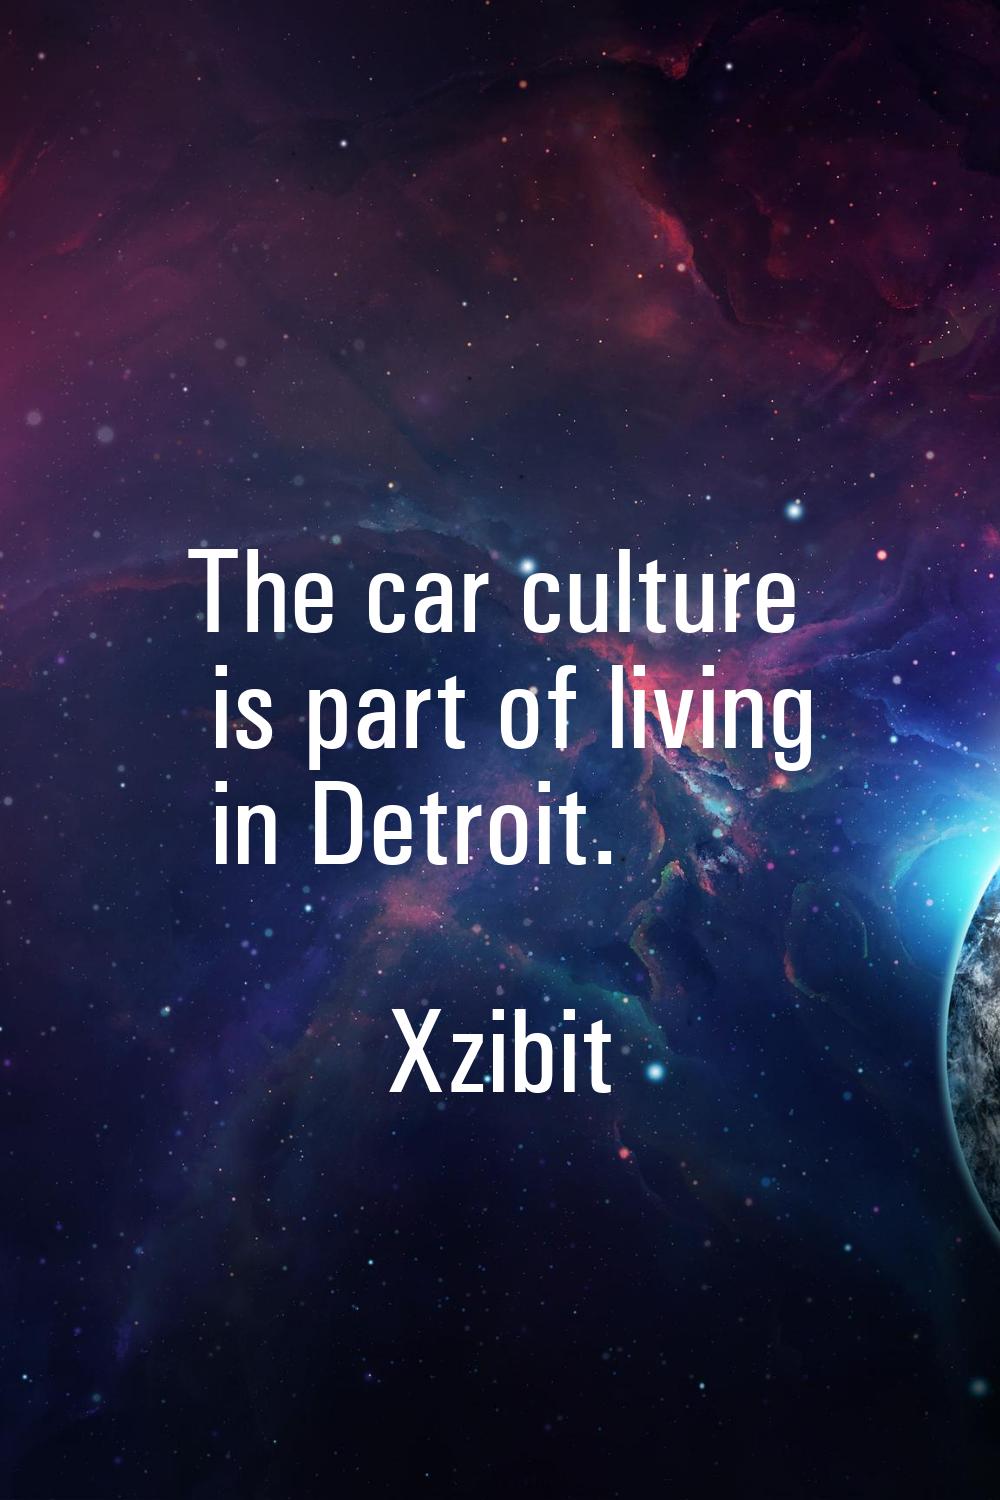 The car culture is part of living in Detroit.